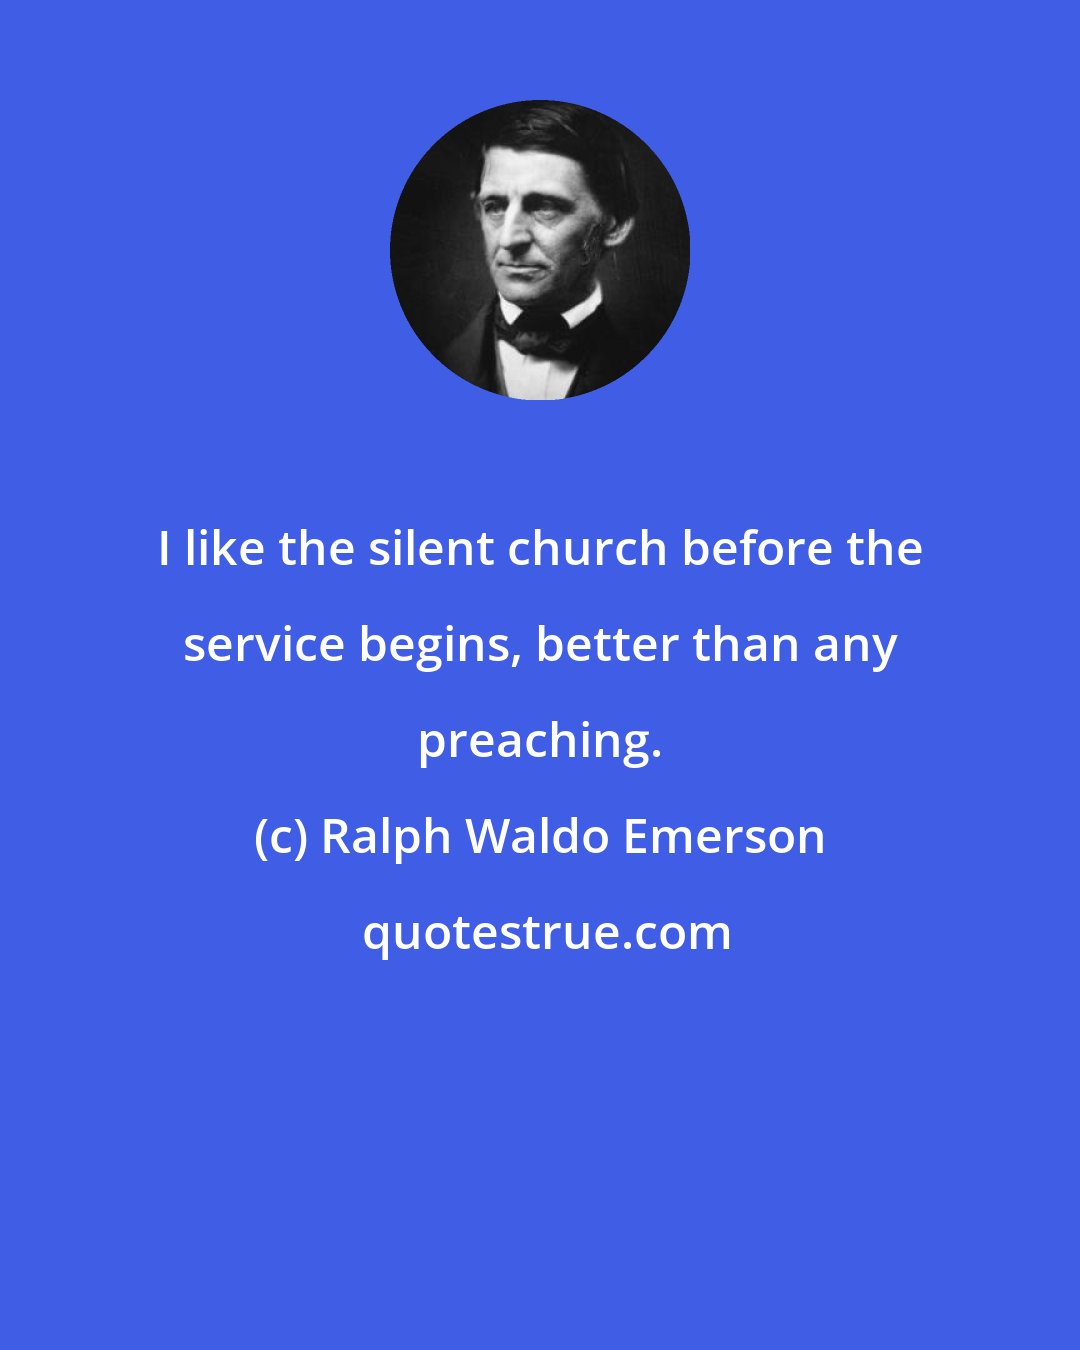 Ralph Waldo Emerson: I like the silent church before the service begins, better than any preaching.